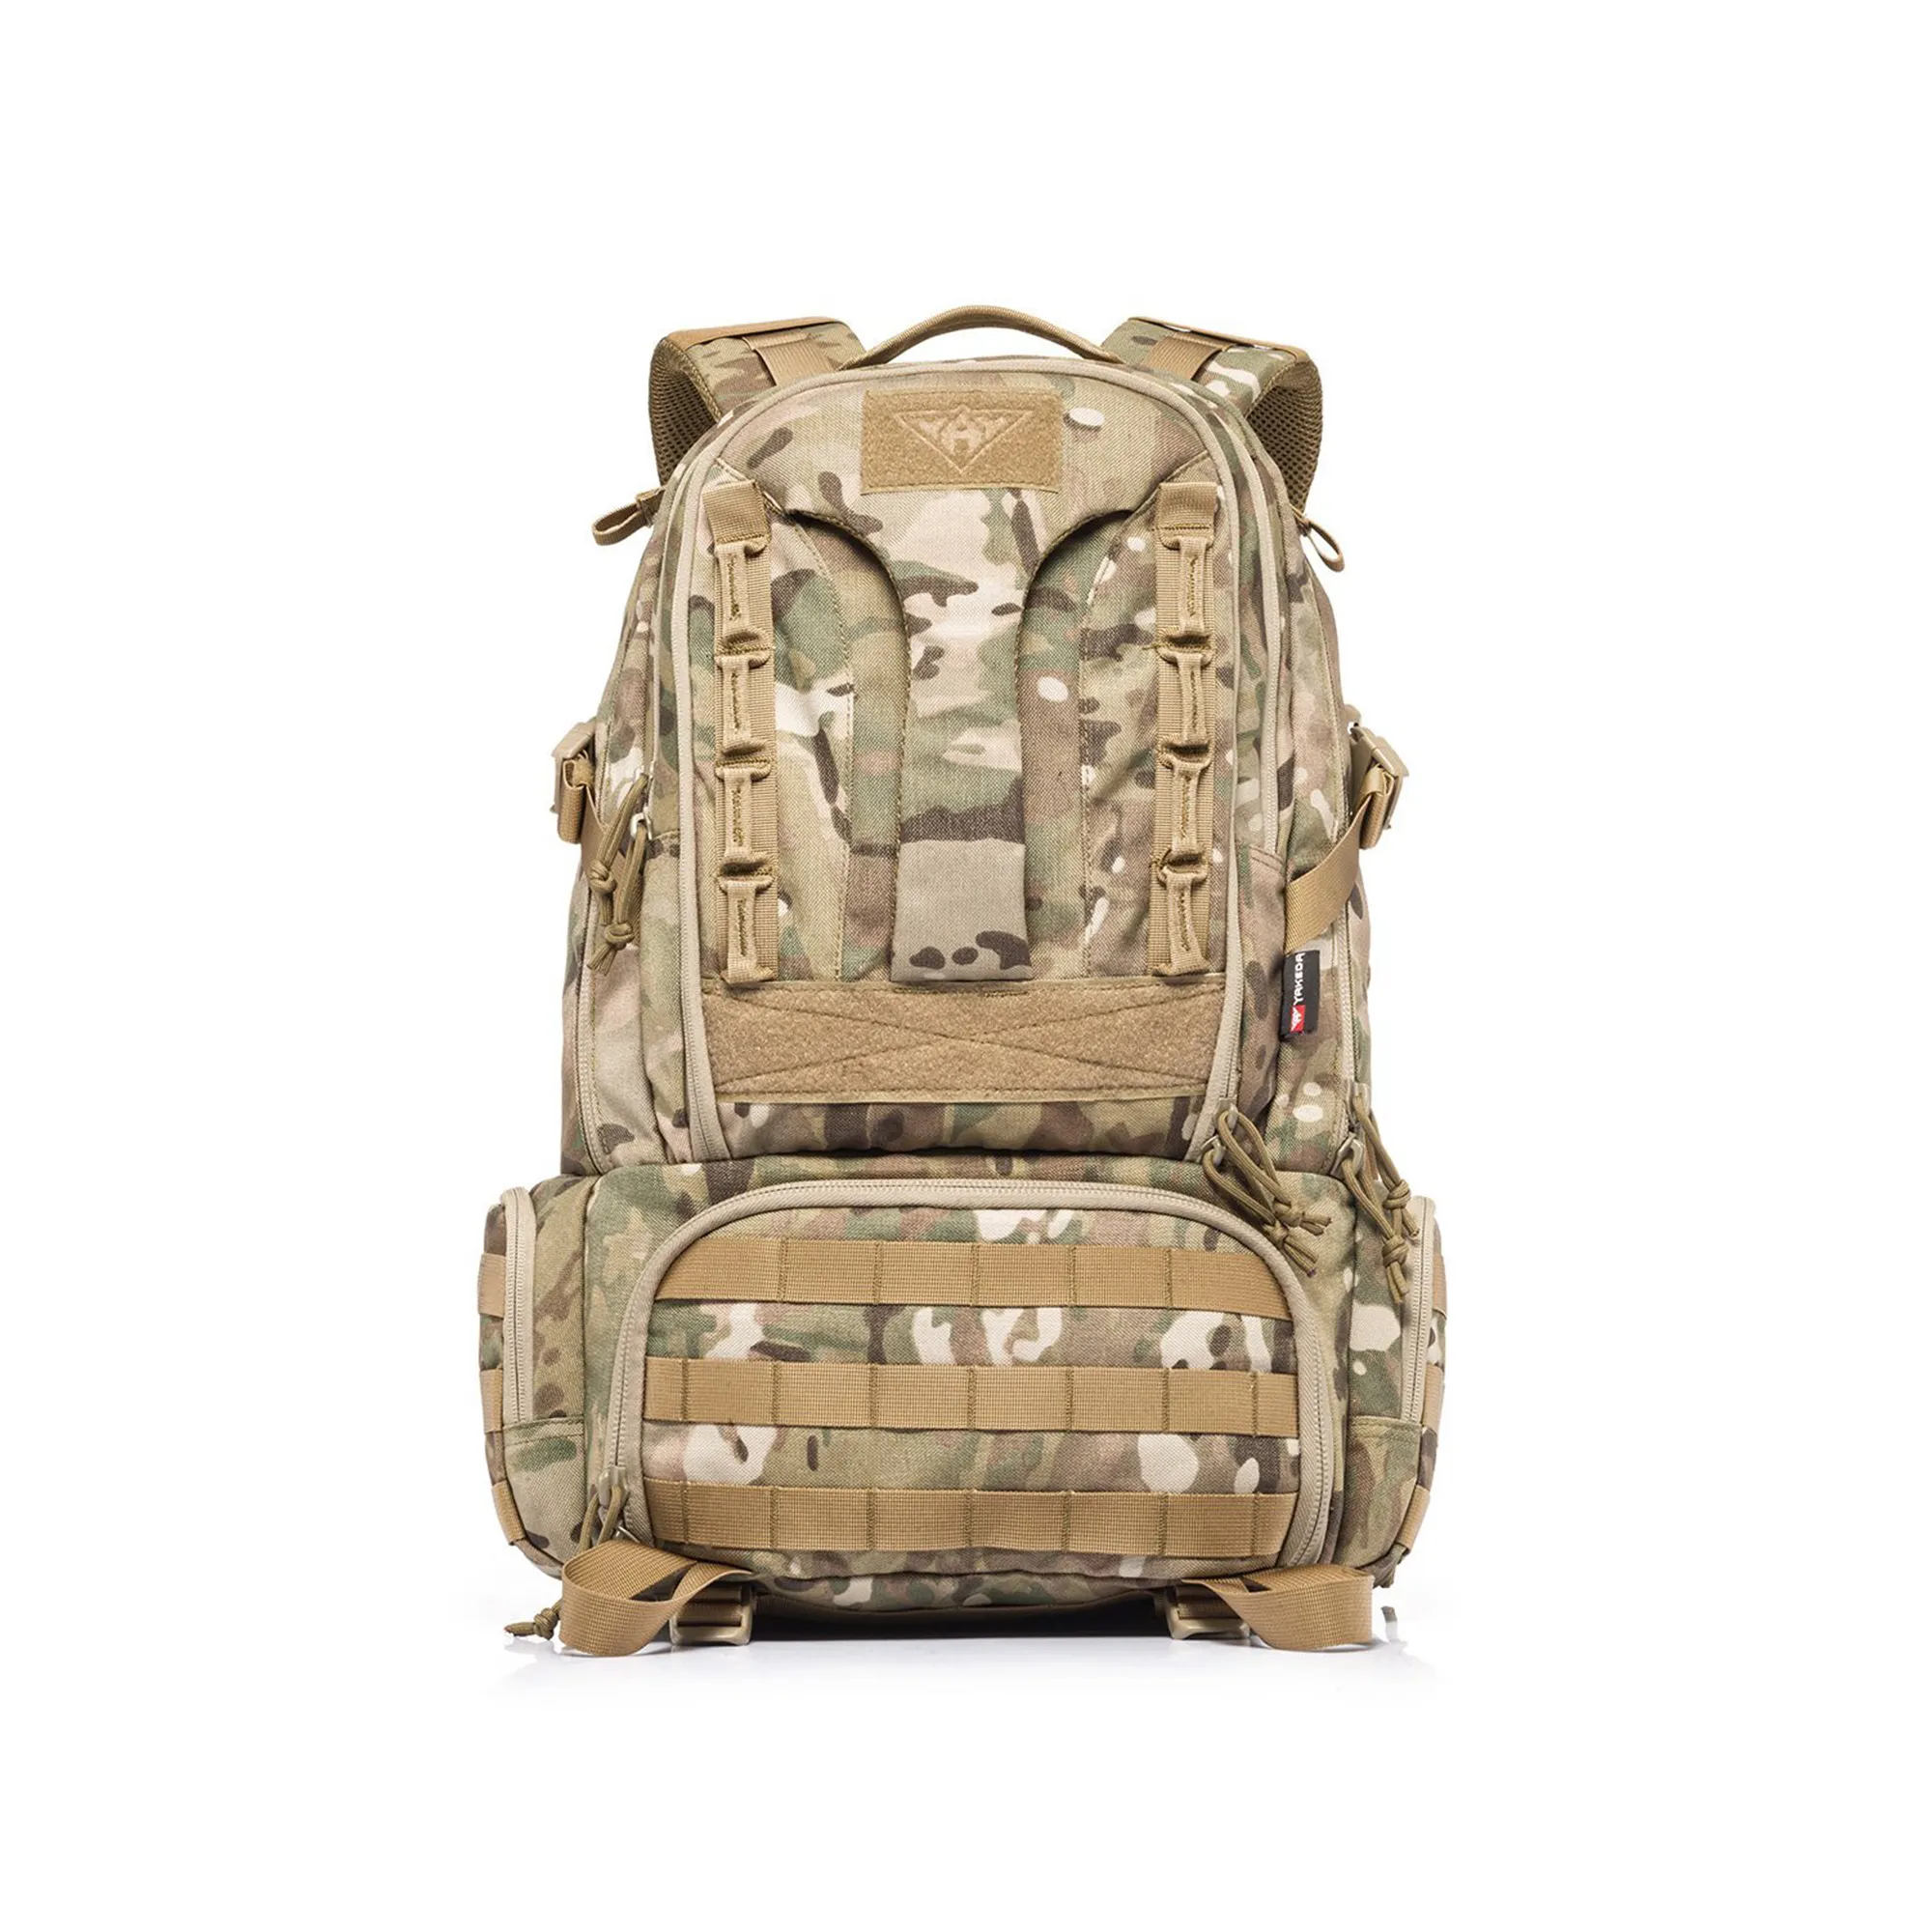 Assault Pack Backpack Molle Bug Out Bag Backpacks Small Rucksack for Outdoor Hiking Camping